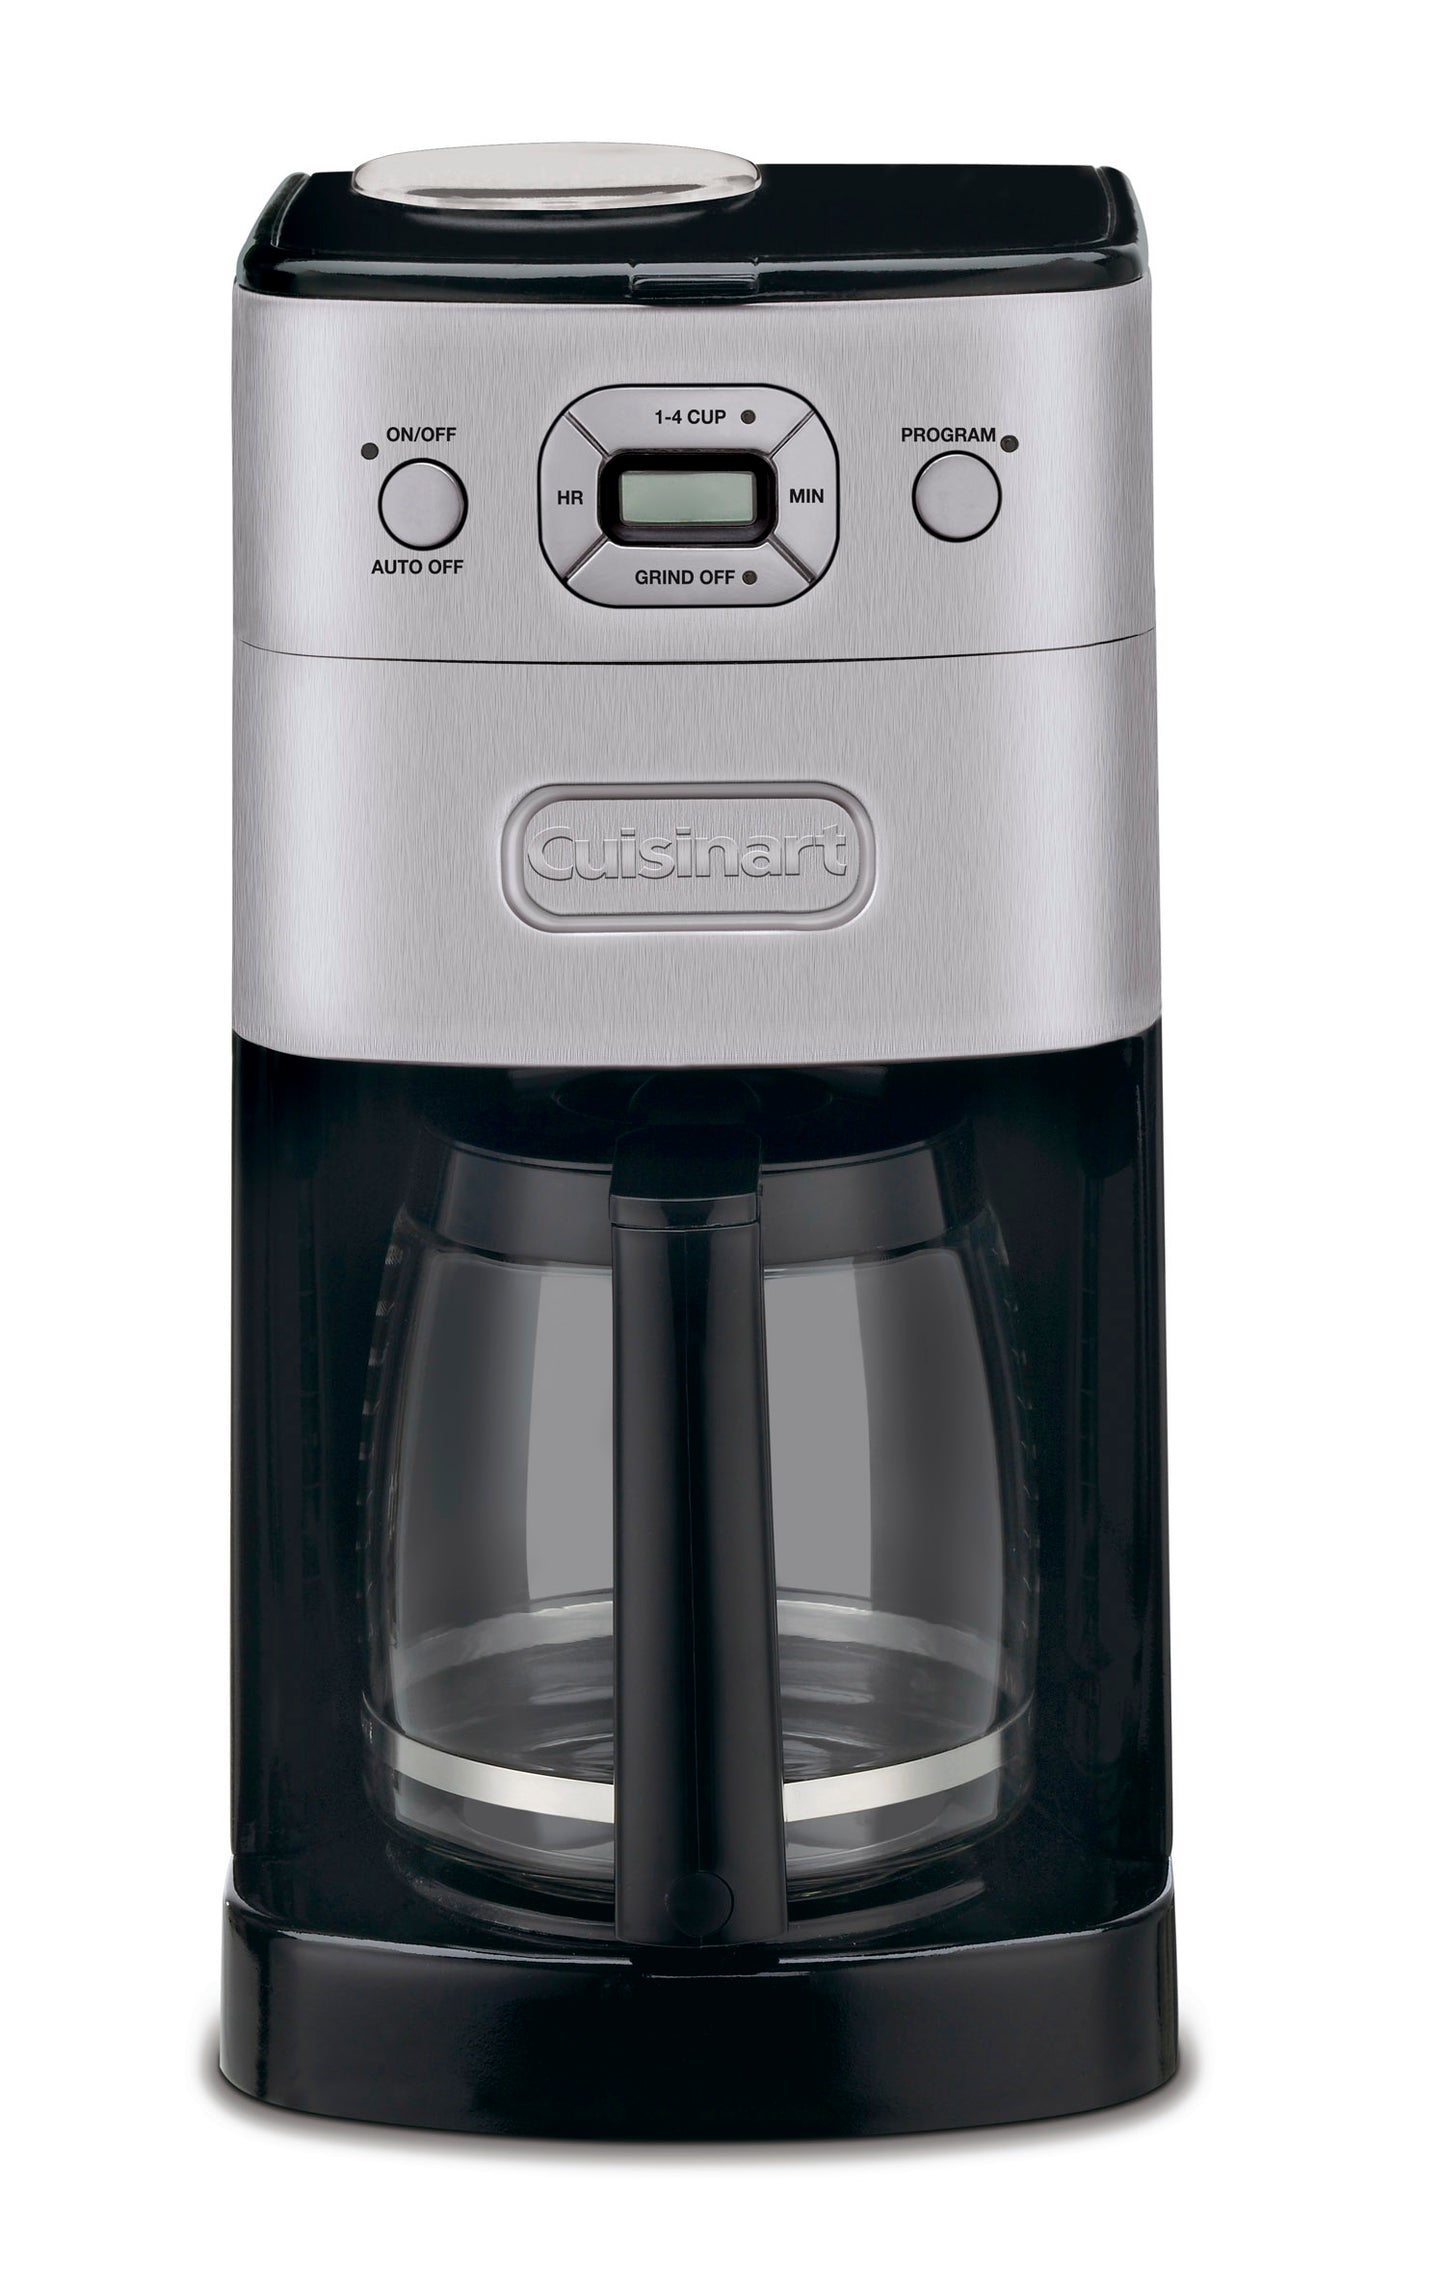 Cuisinart DGB-625BC Grind & Brew 12-Cup Automatic Coffee Maker